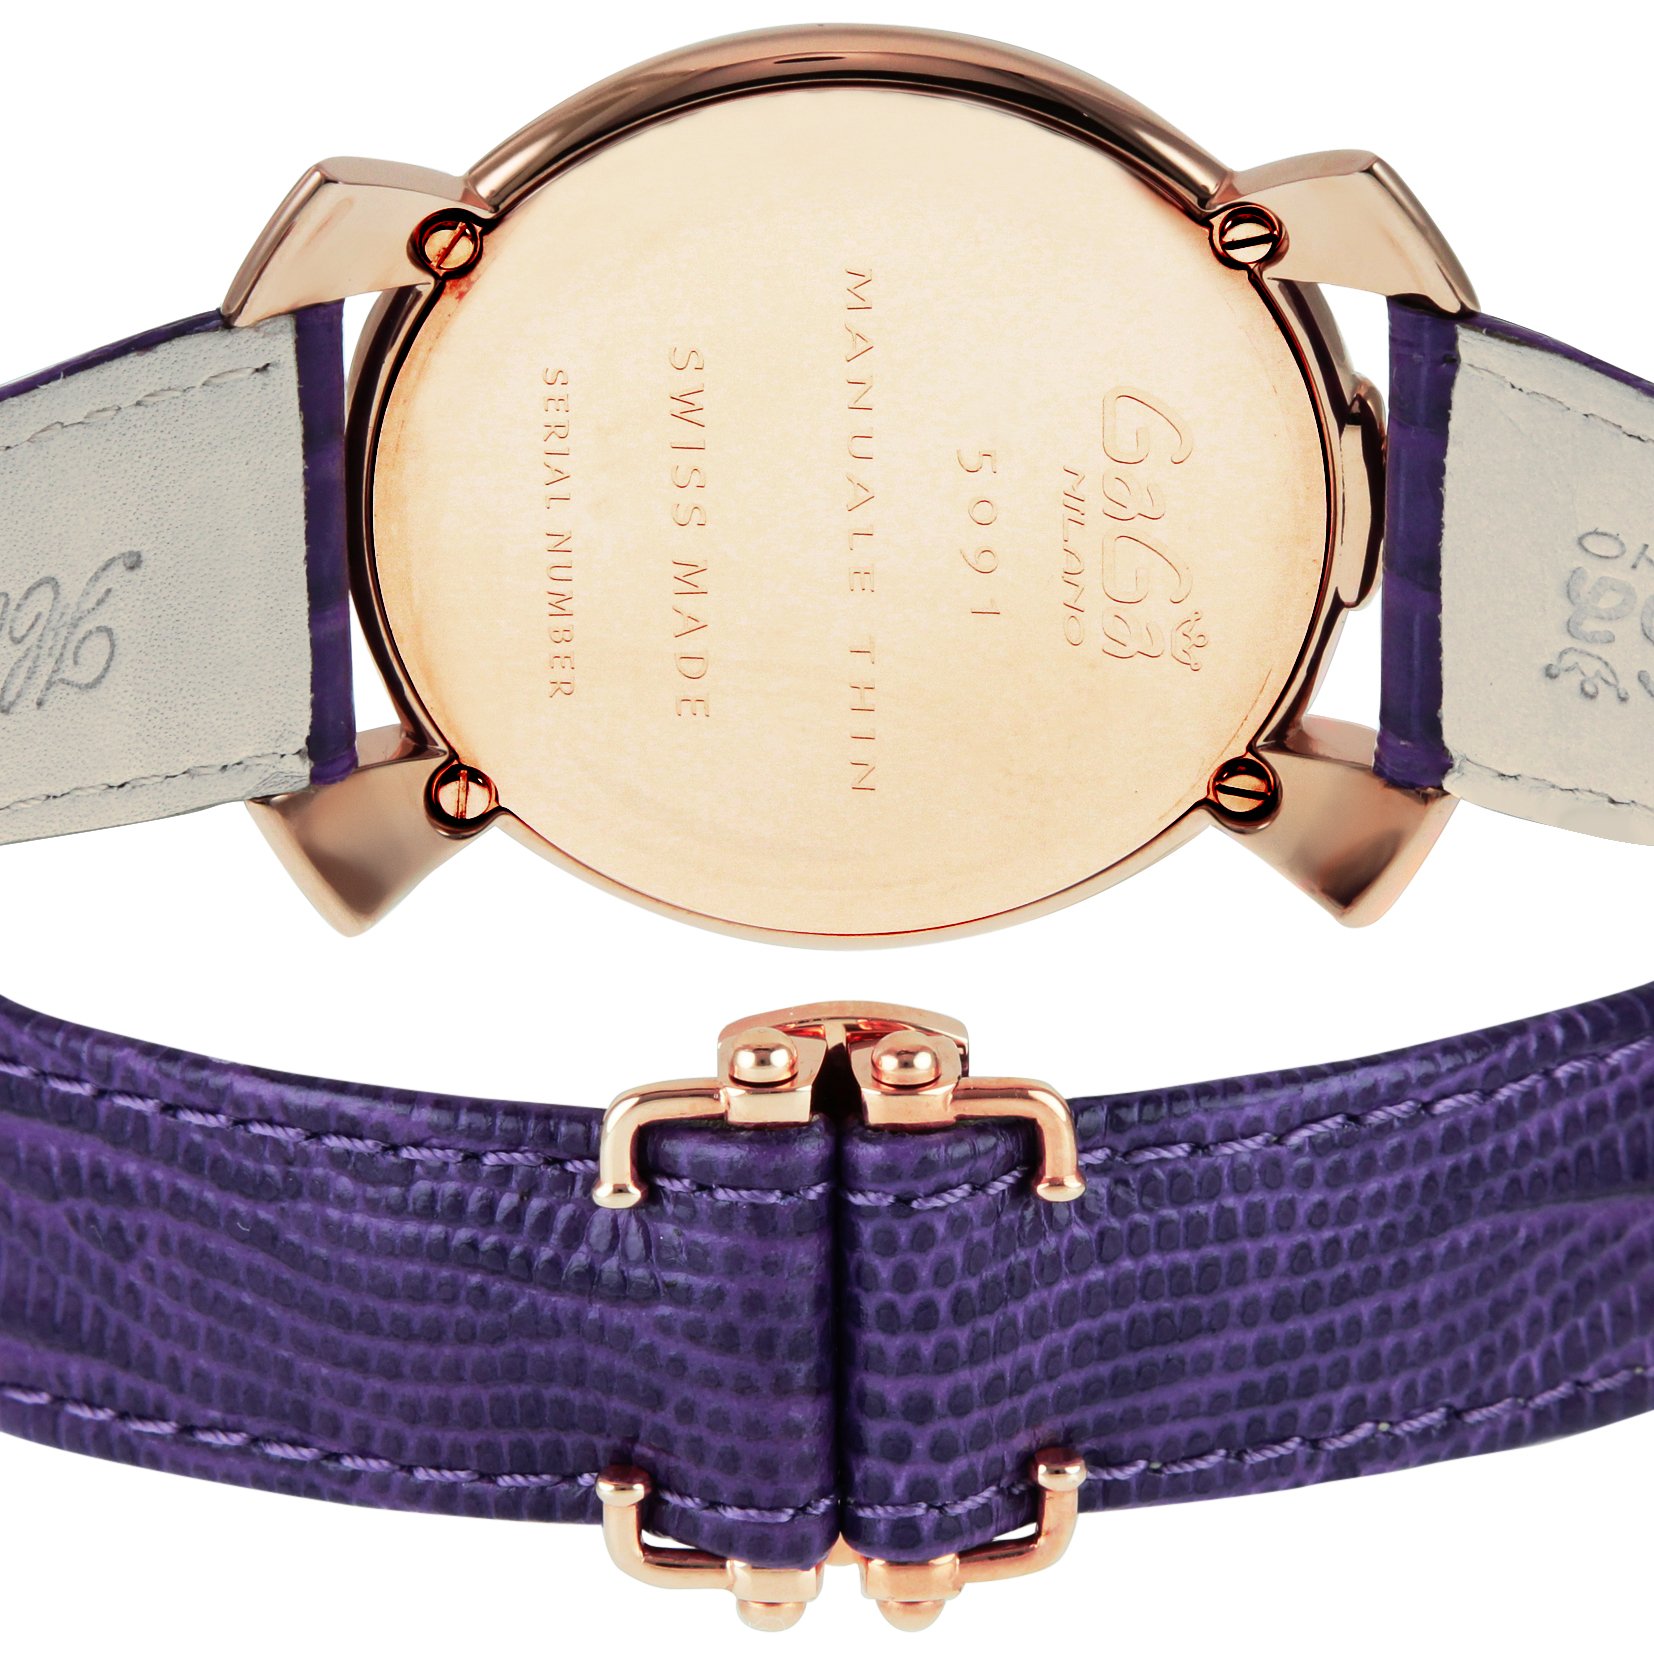 Gaga Milano 5091.02 MANUALE Thin 46mm Light Purple Dial Watch, Parallel Import, Dial Color - Purple, Watch